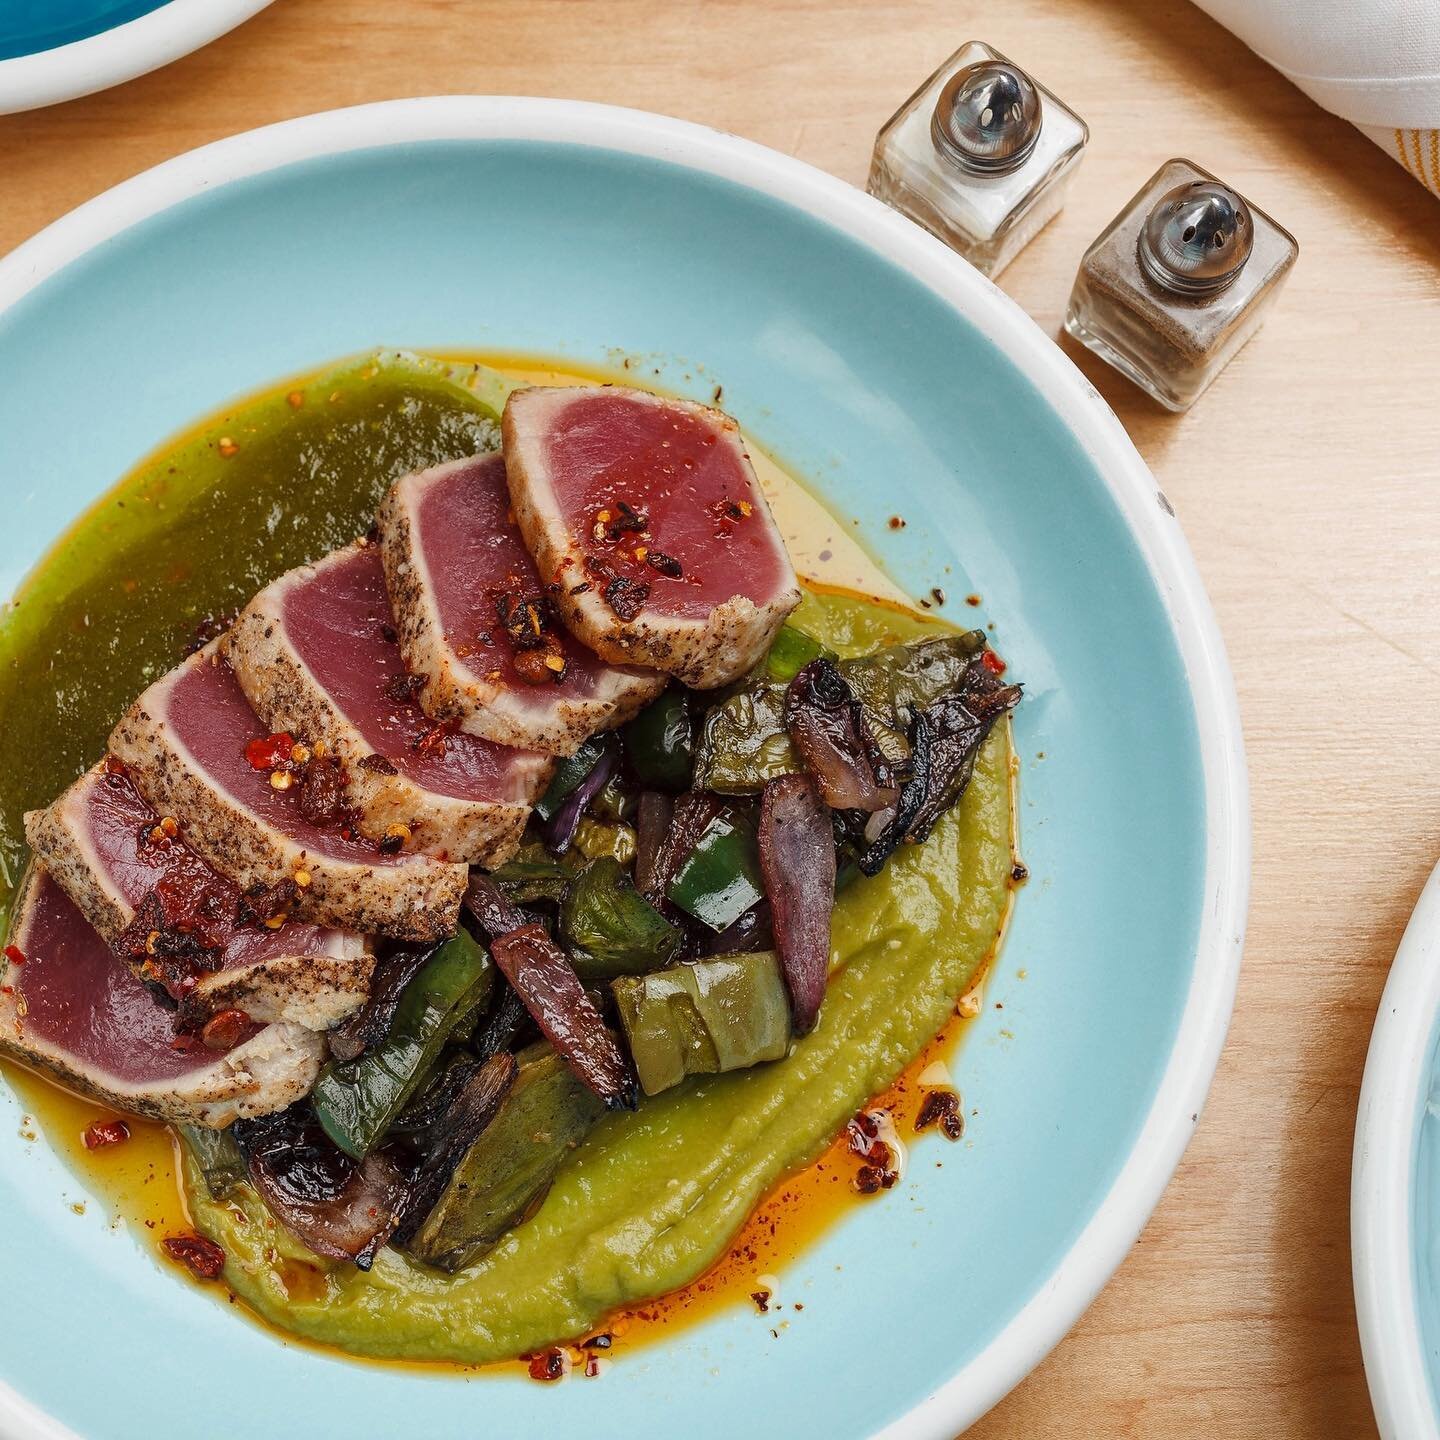 We&rsquo;re sad to announce there will be no Wednesday Night Raw this evening! However, we still have 1/2 off bottles of wine till 6pm which are best paired with our seared tuna! Listen... we don&rsquo;t make the rules, so come and get it! #tasteslik